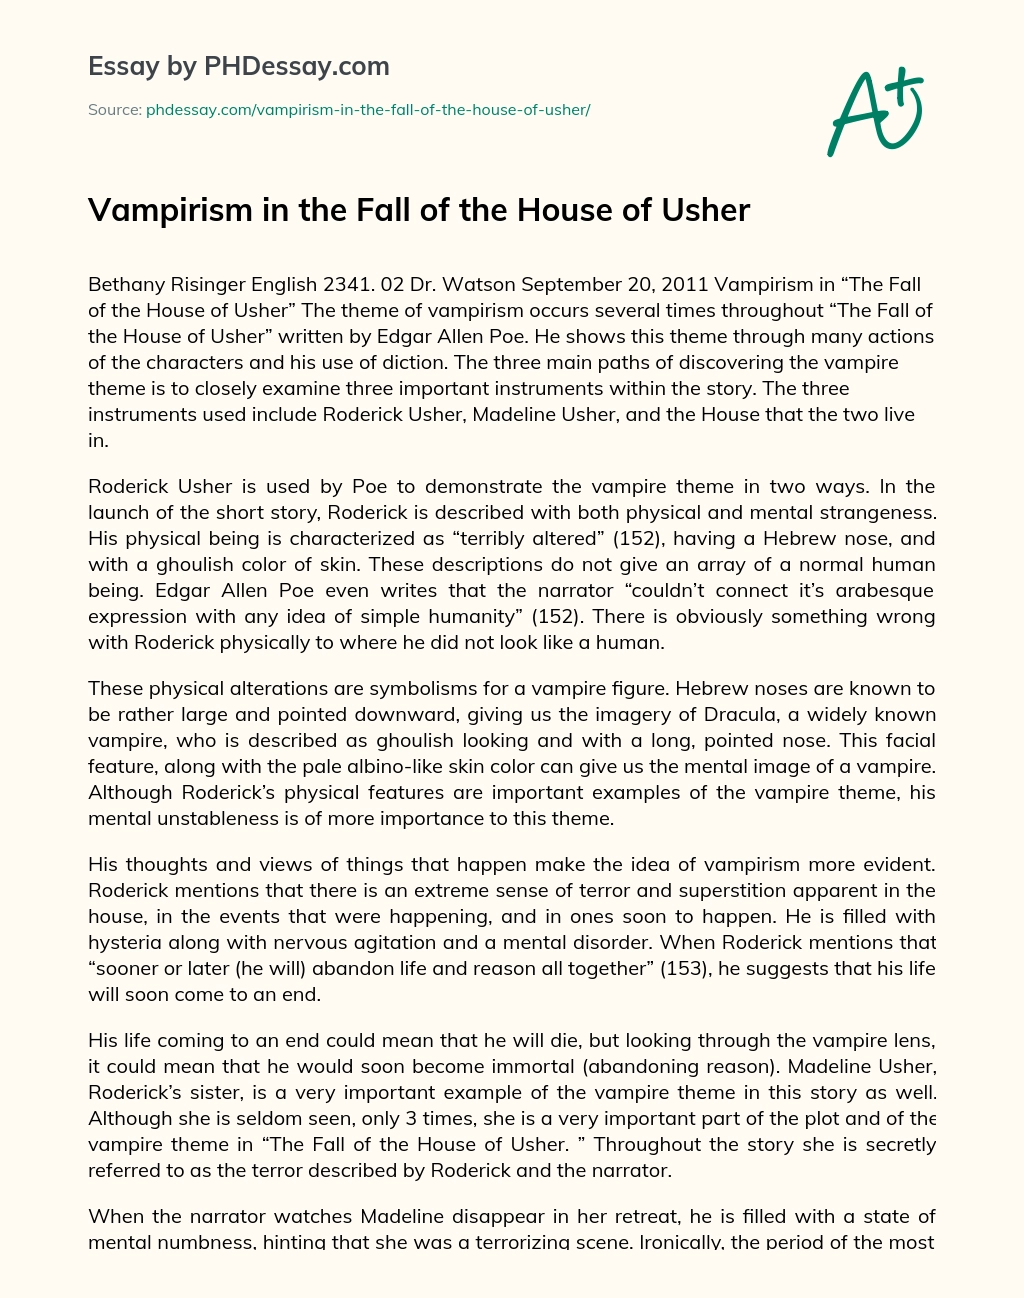 Vampirism in the Fall of the House of Usher essay